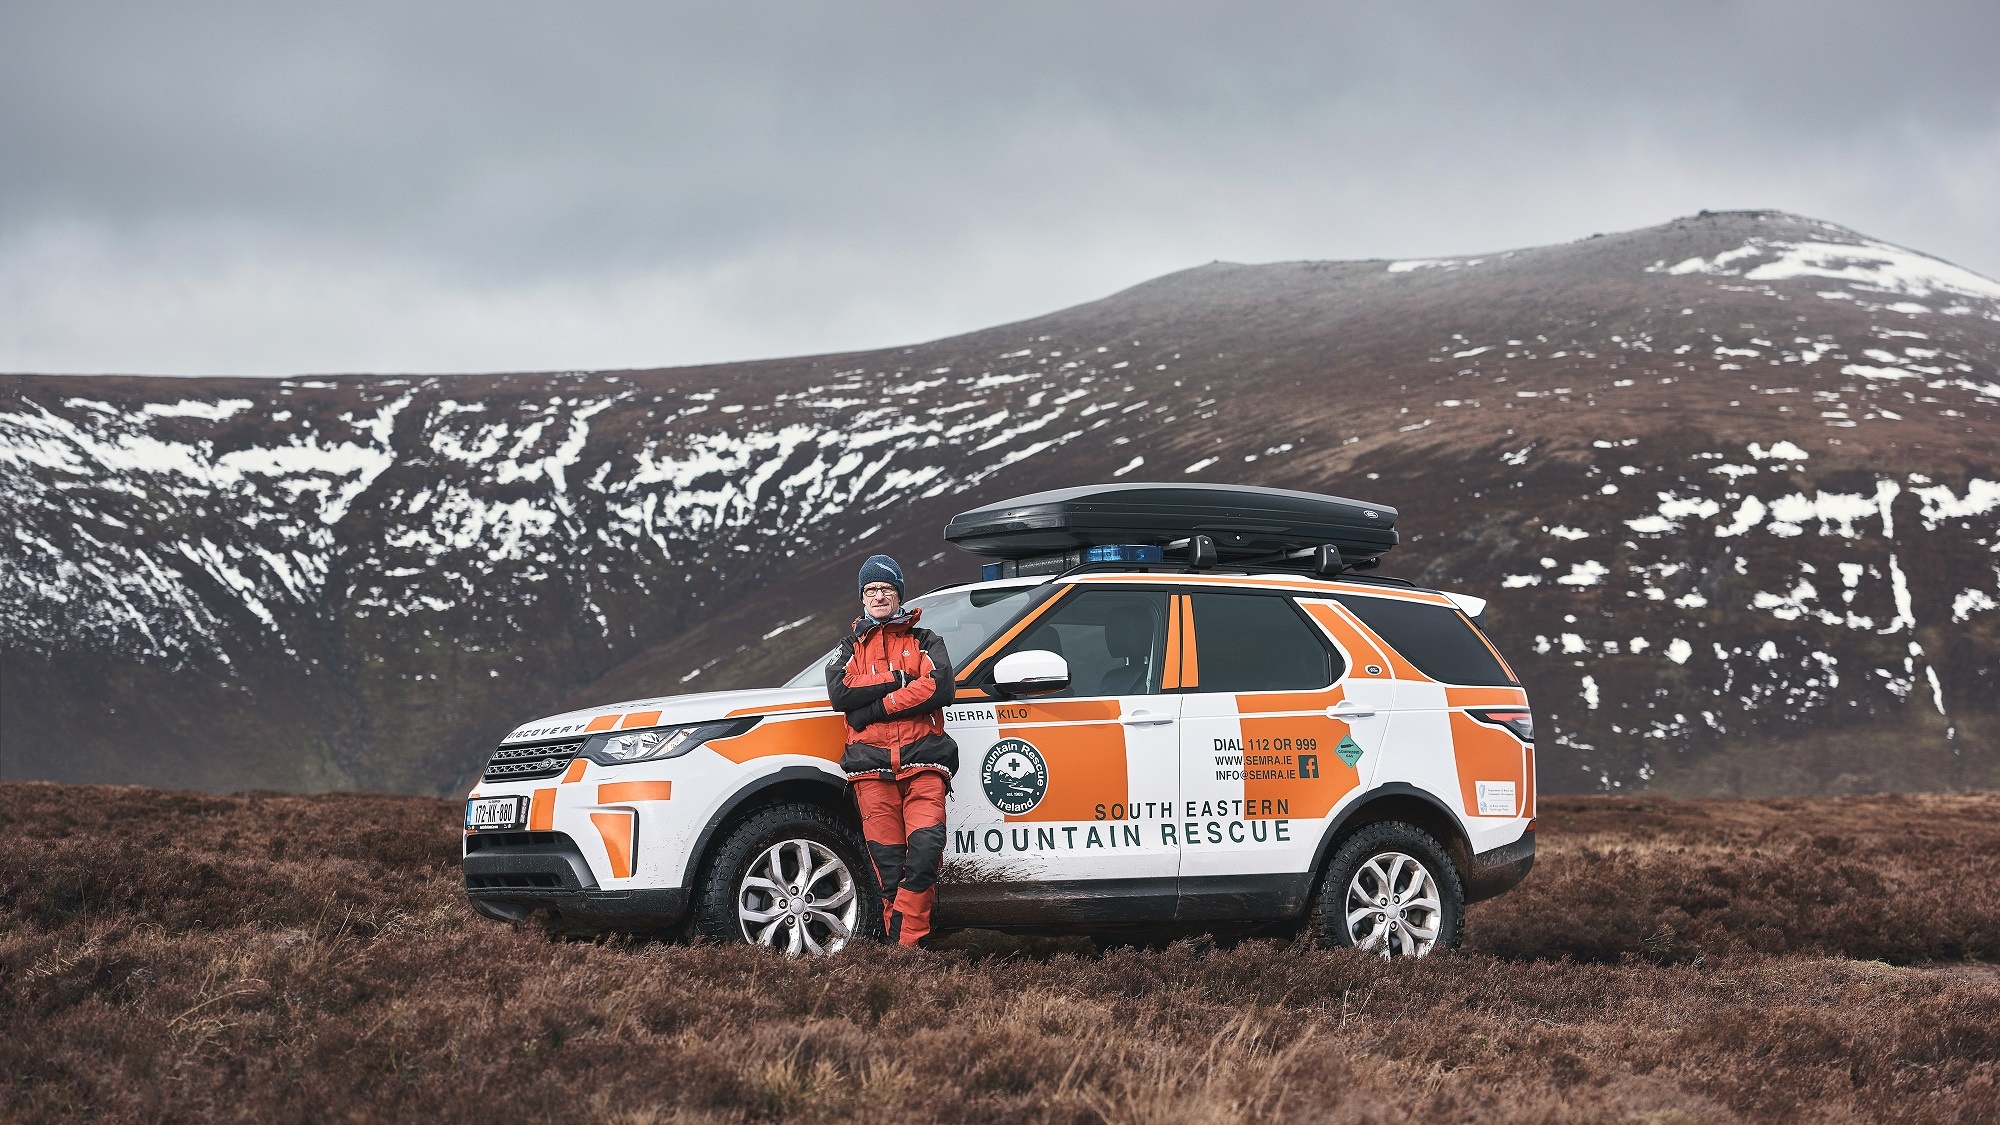 LAND ROVER DISCOVERY SUPPORTS LANDMARK RESCUE AS MOUNTAINS REOPEN